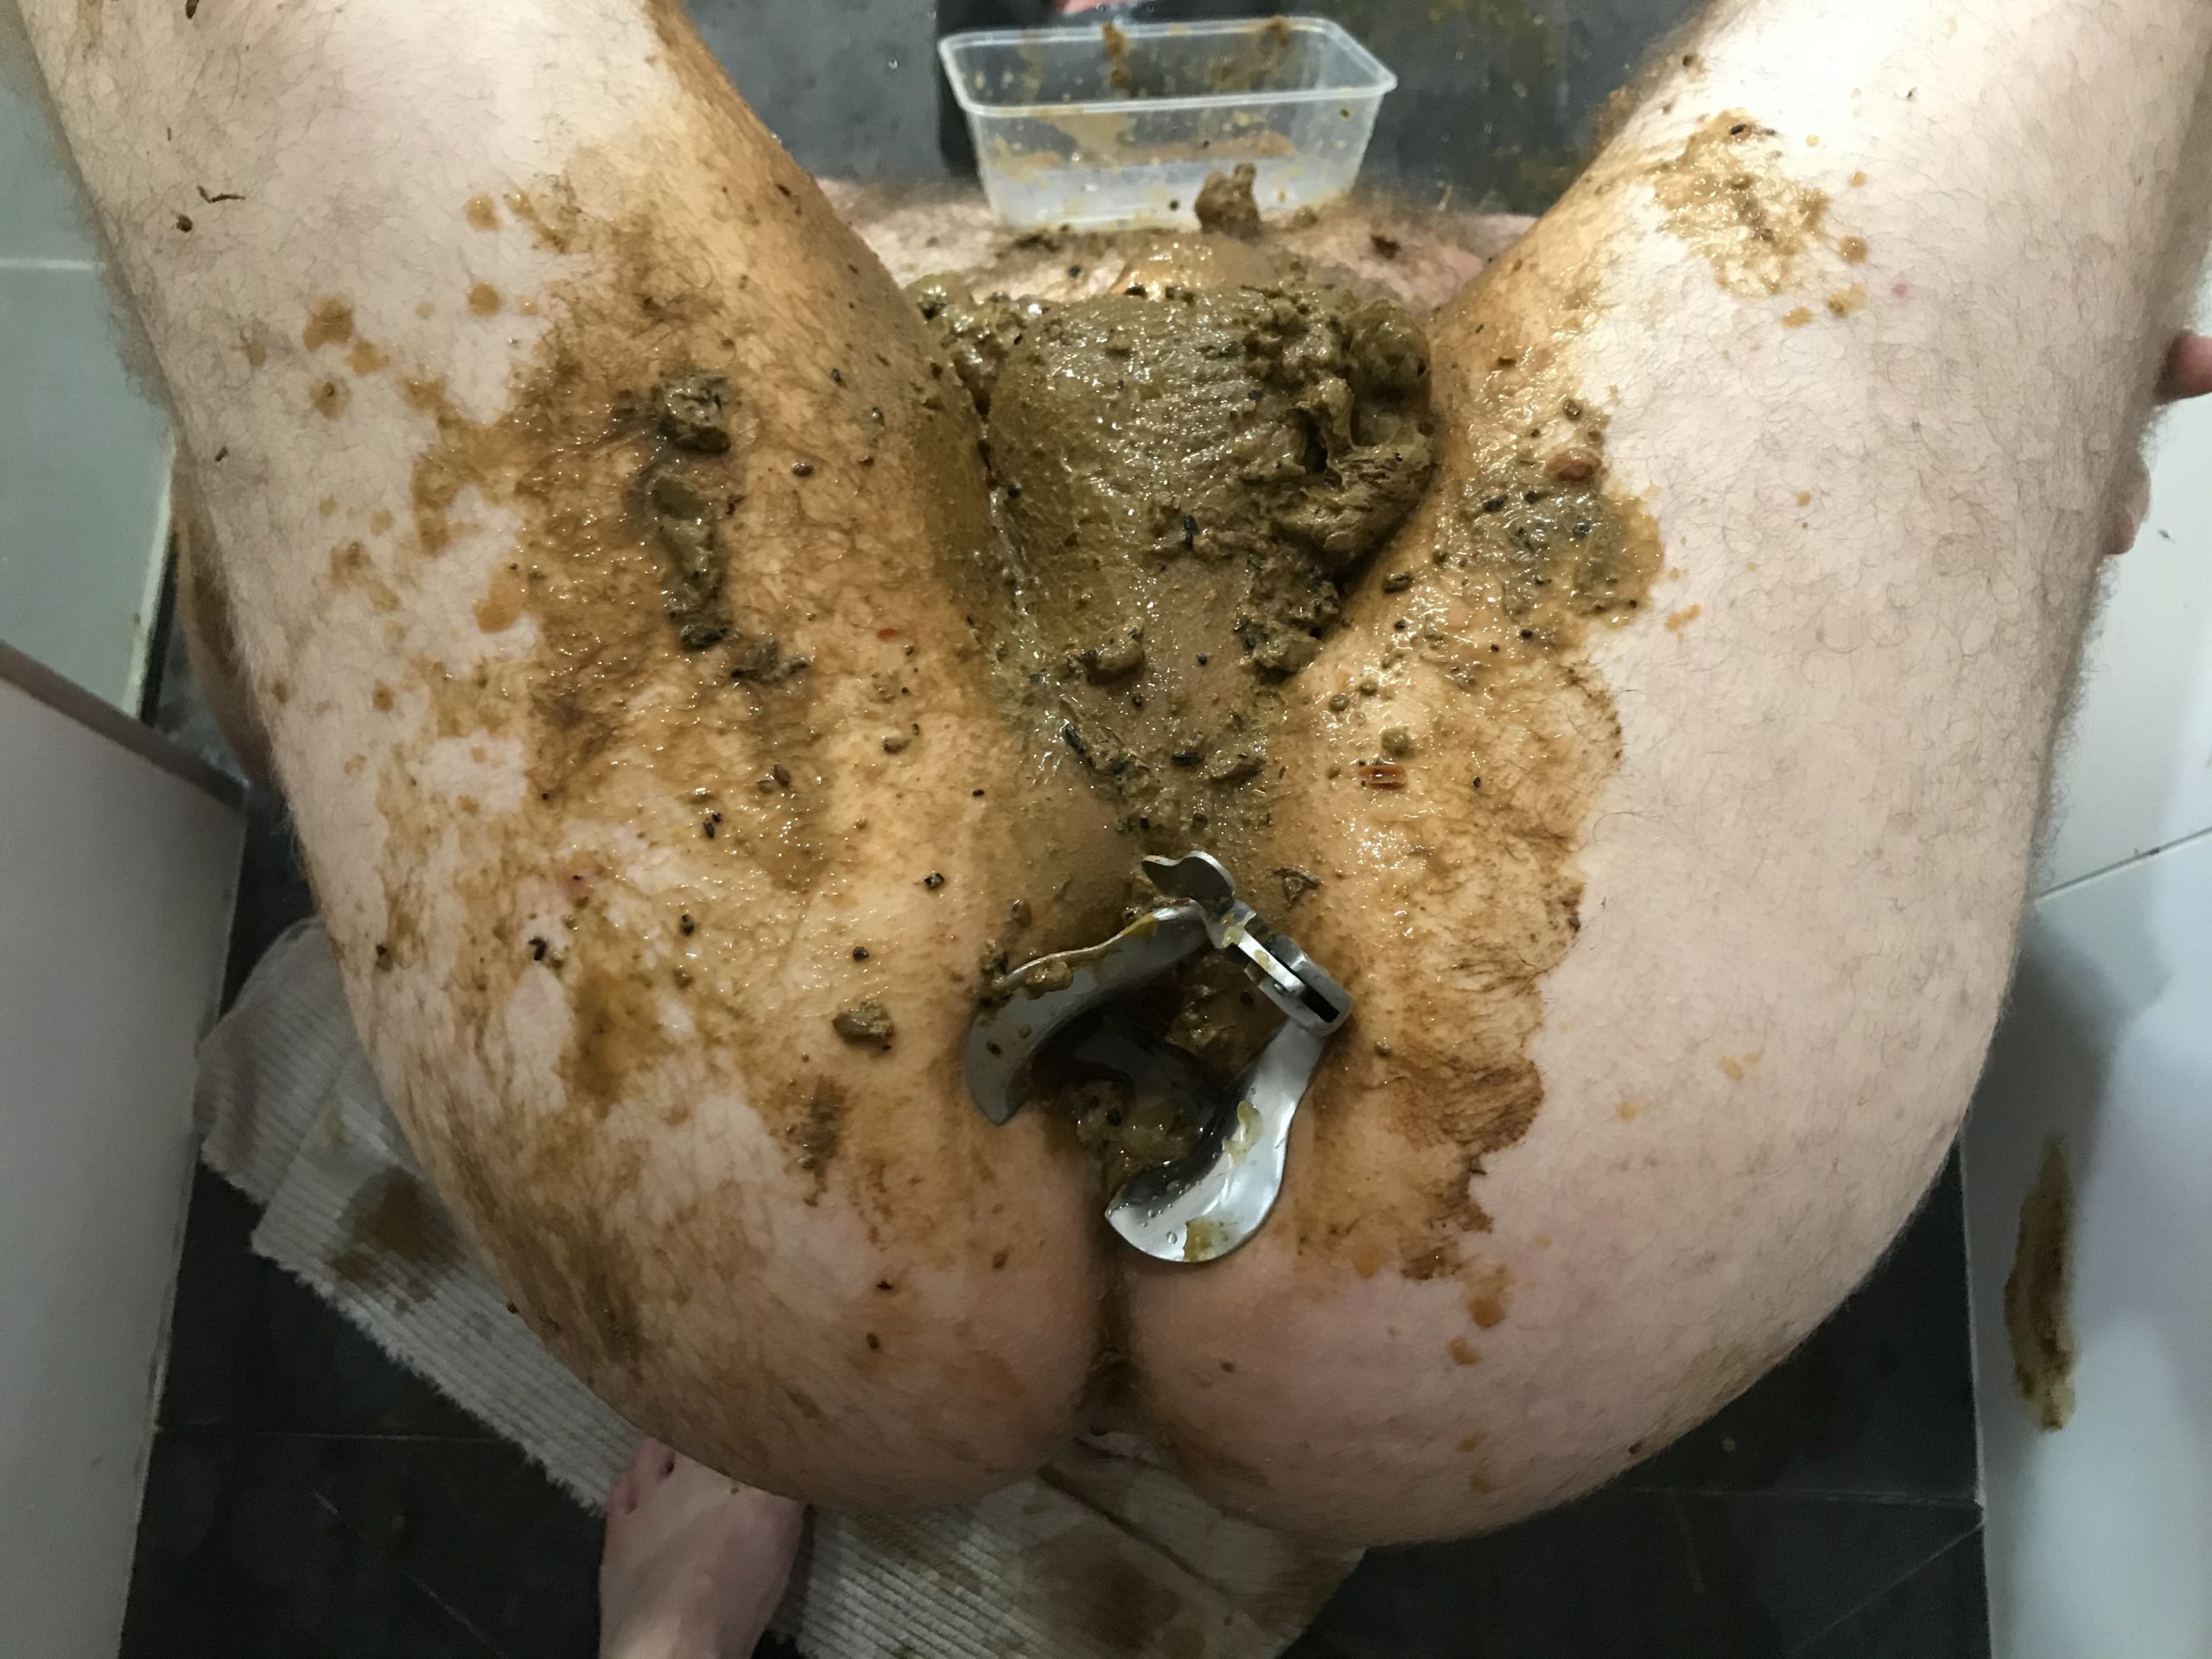 filled with my piss and shit